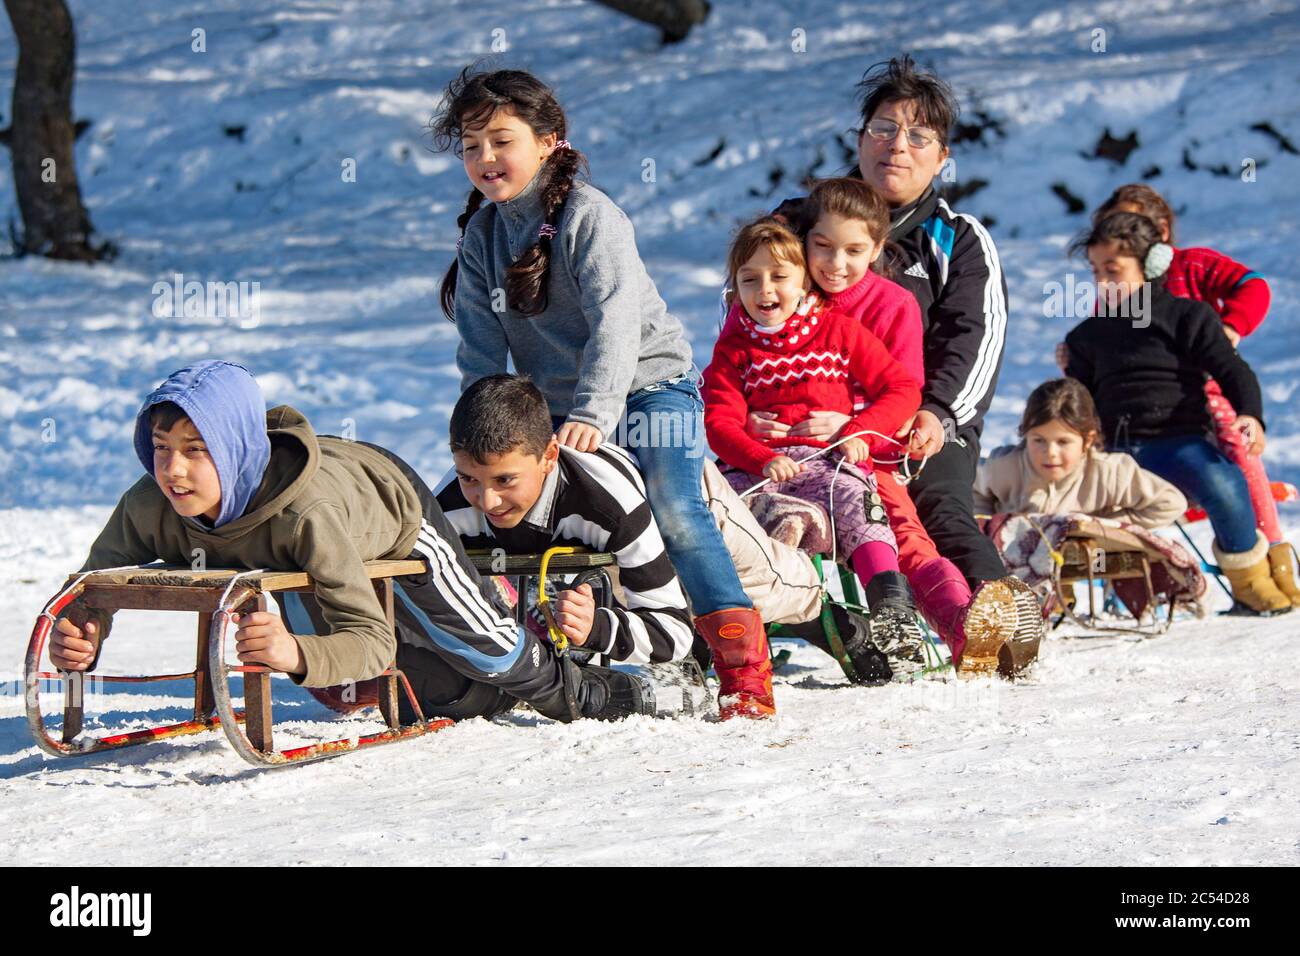 FAGET, CLUJ COUNTY, ROMANIA - FEBRUARY.04.2014: Children from a socially disadvantaged community taken on a vacation trip on a slope to go sledding Stock Photo